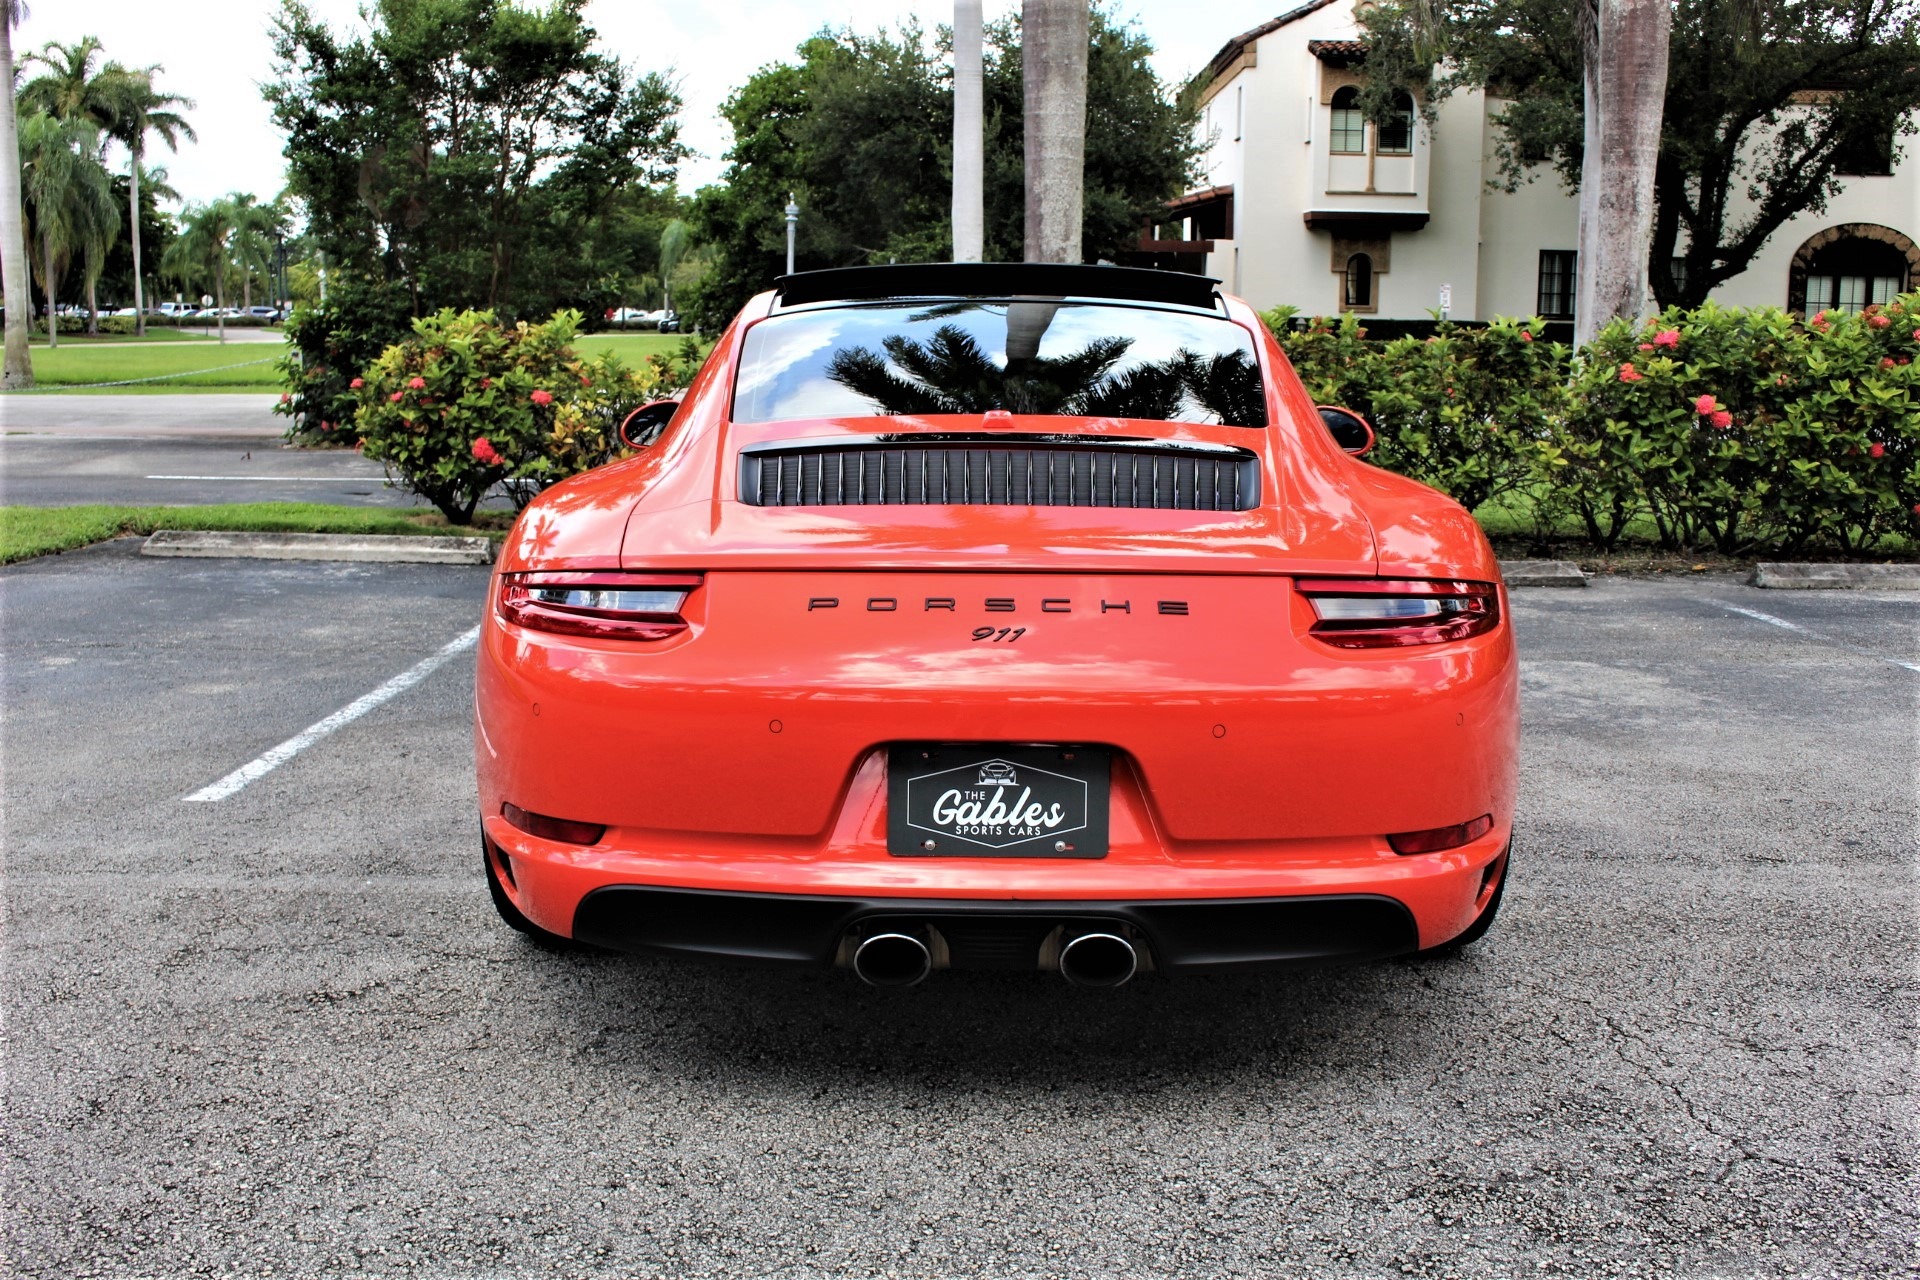 Used 2017 Porsche 911 Carrera S for sale Sold at The Gables Sports Cars in Miami FL 33146 2